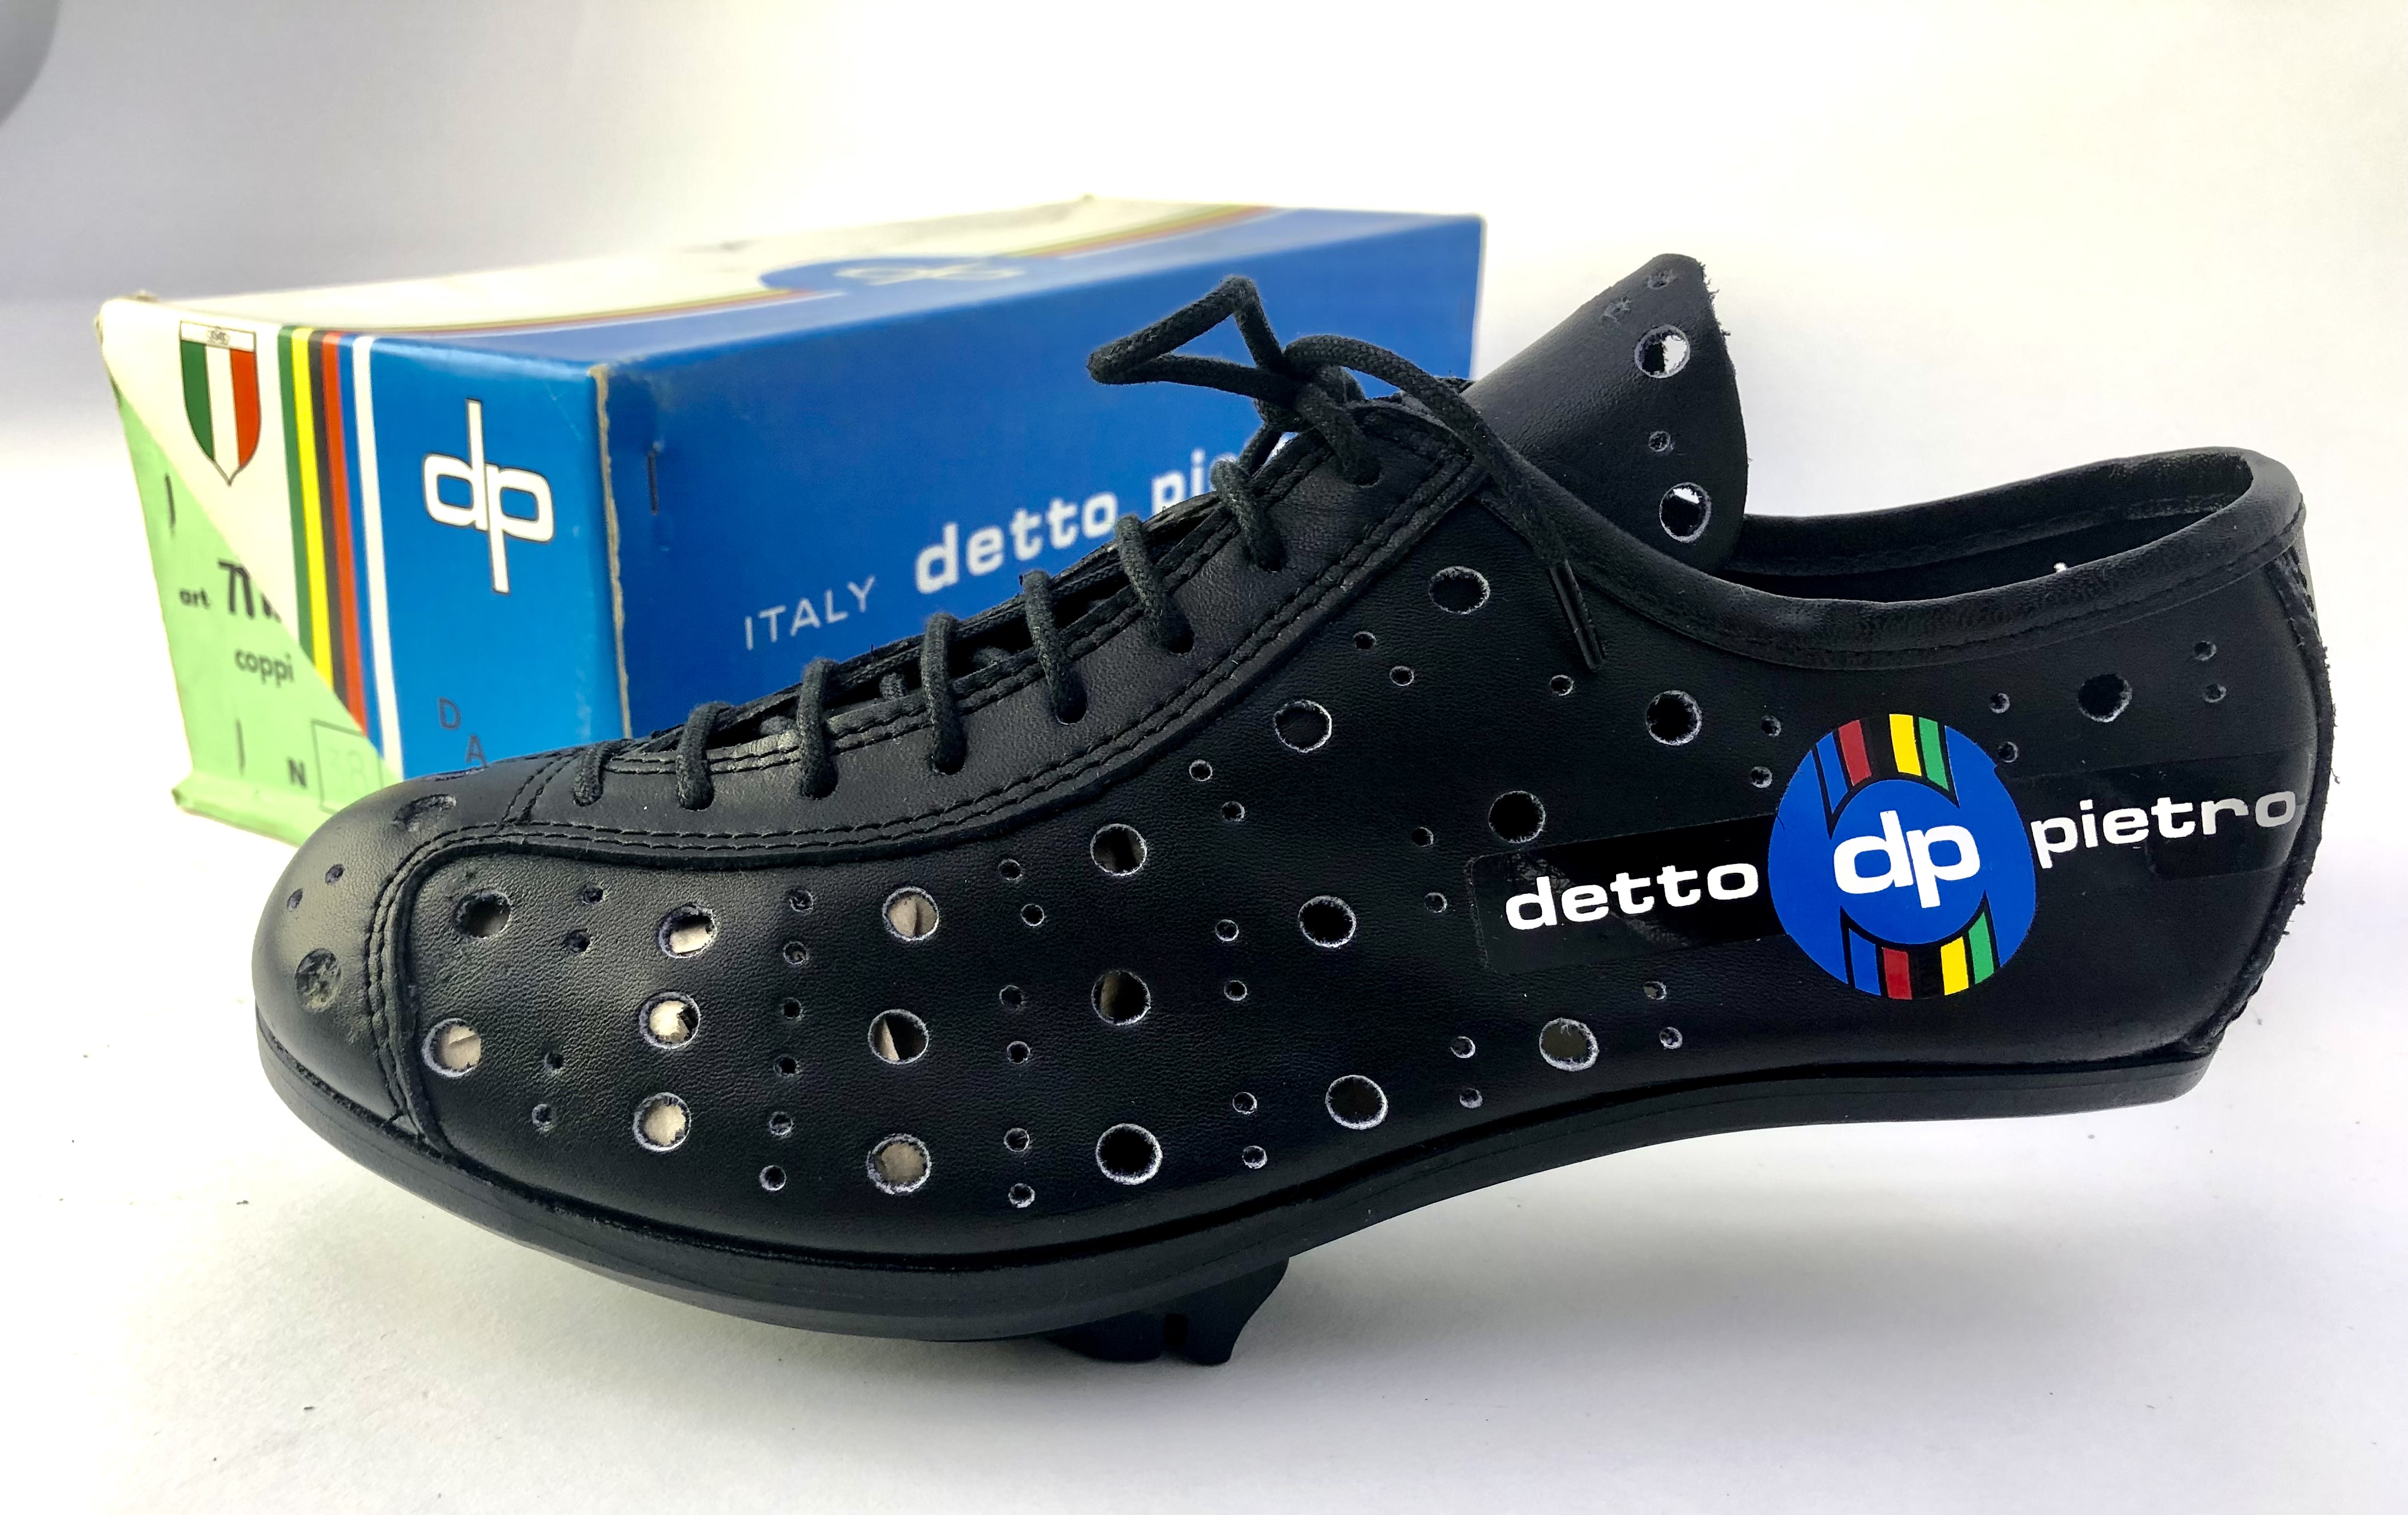 NOS Vintage Detto Pietro 7 TAR coppi Cycling Shoes Size 38